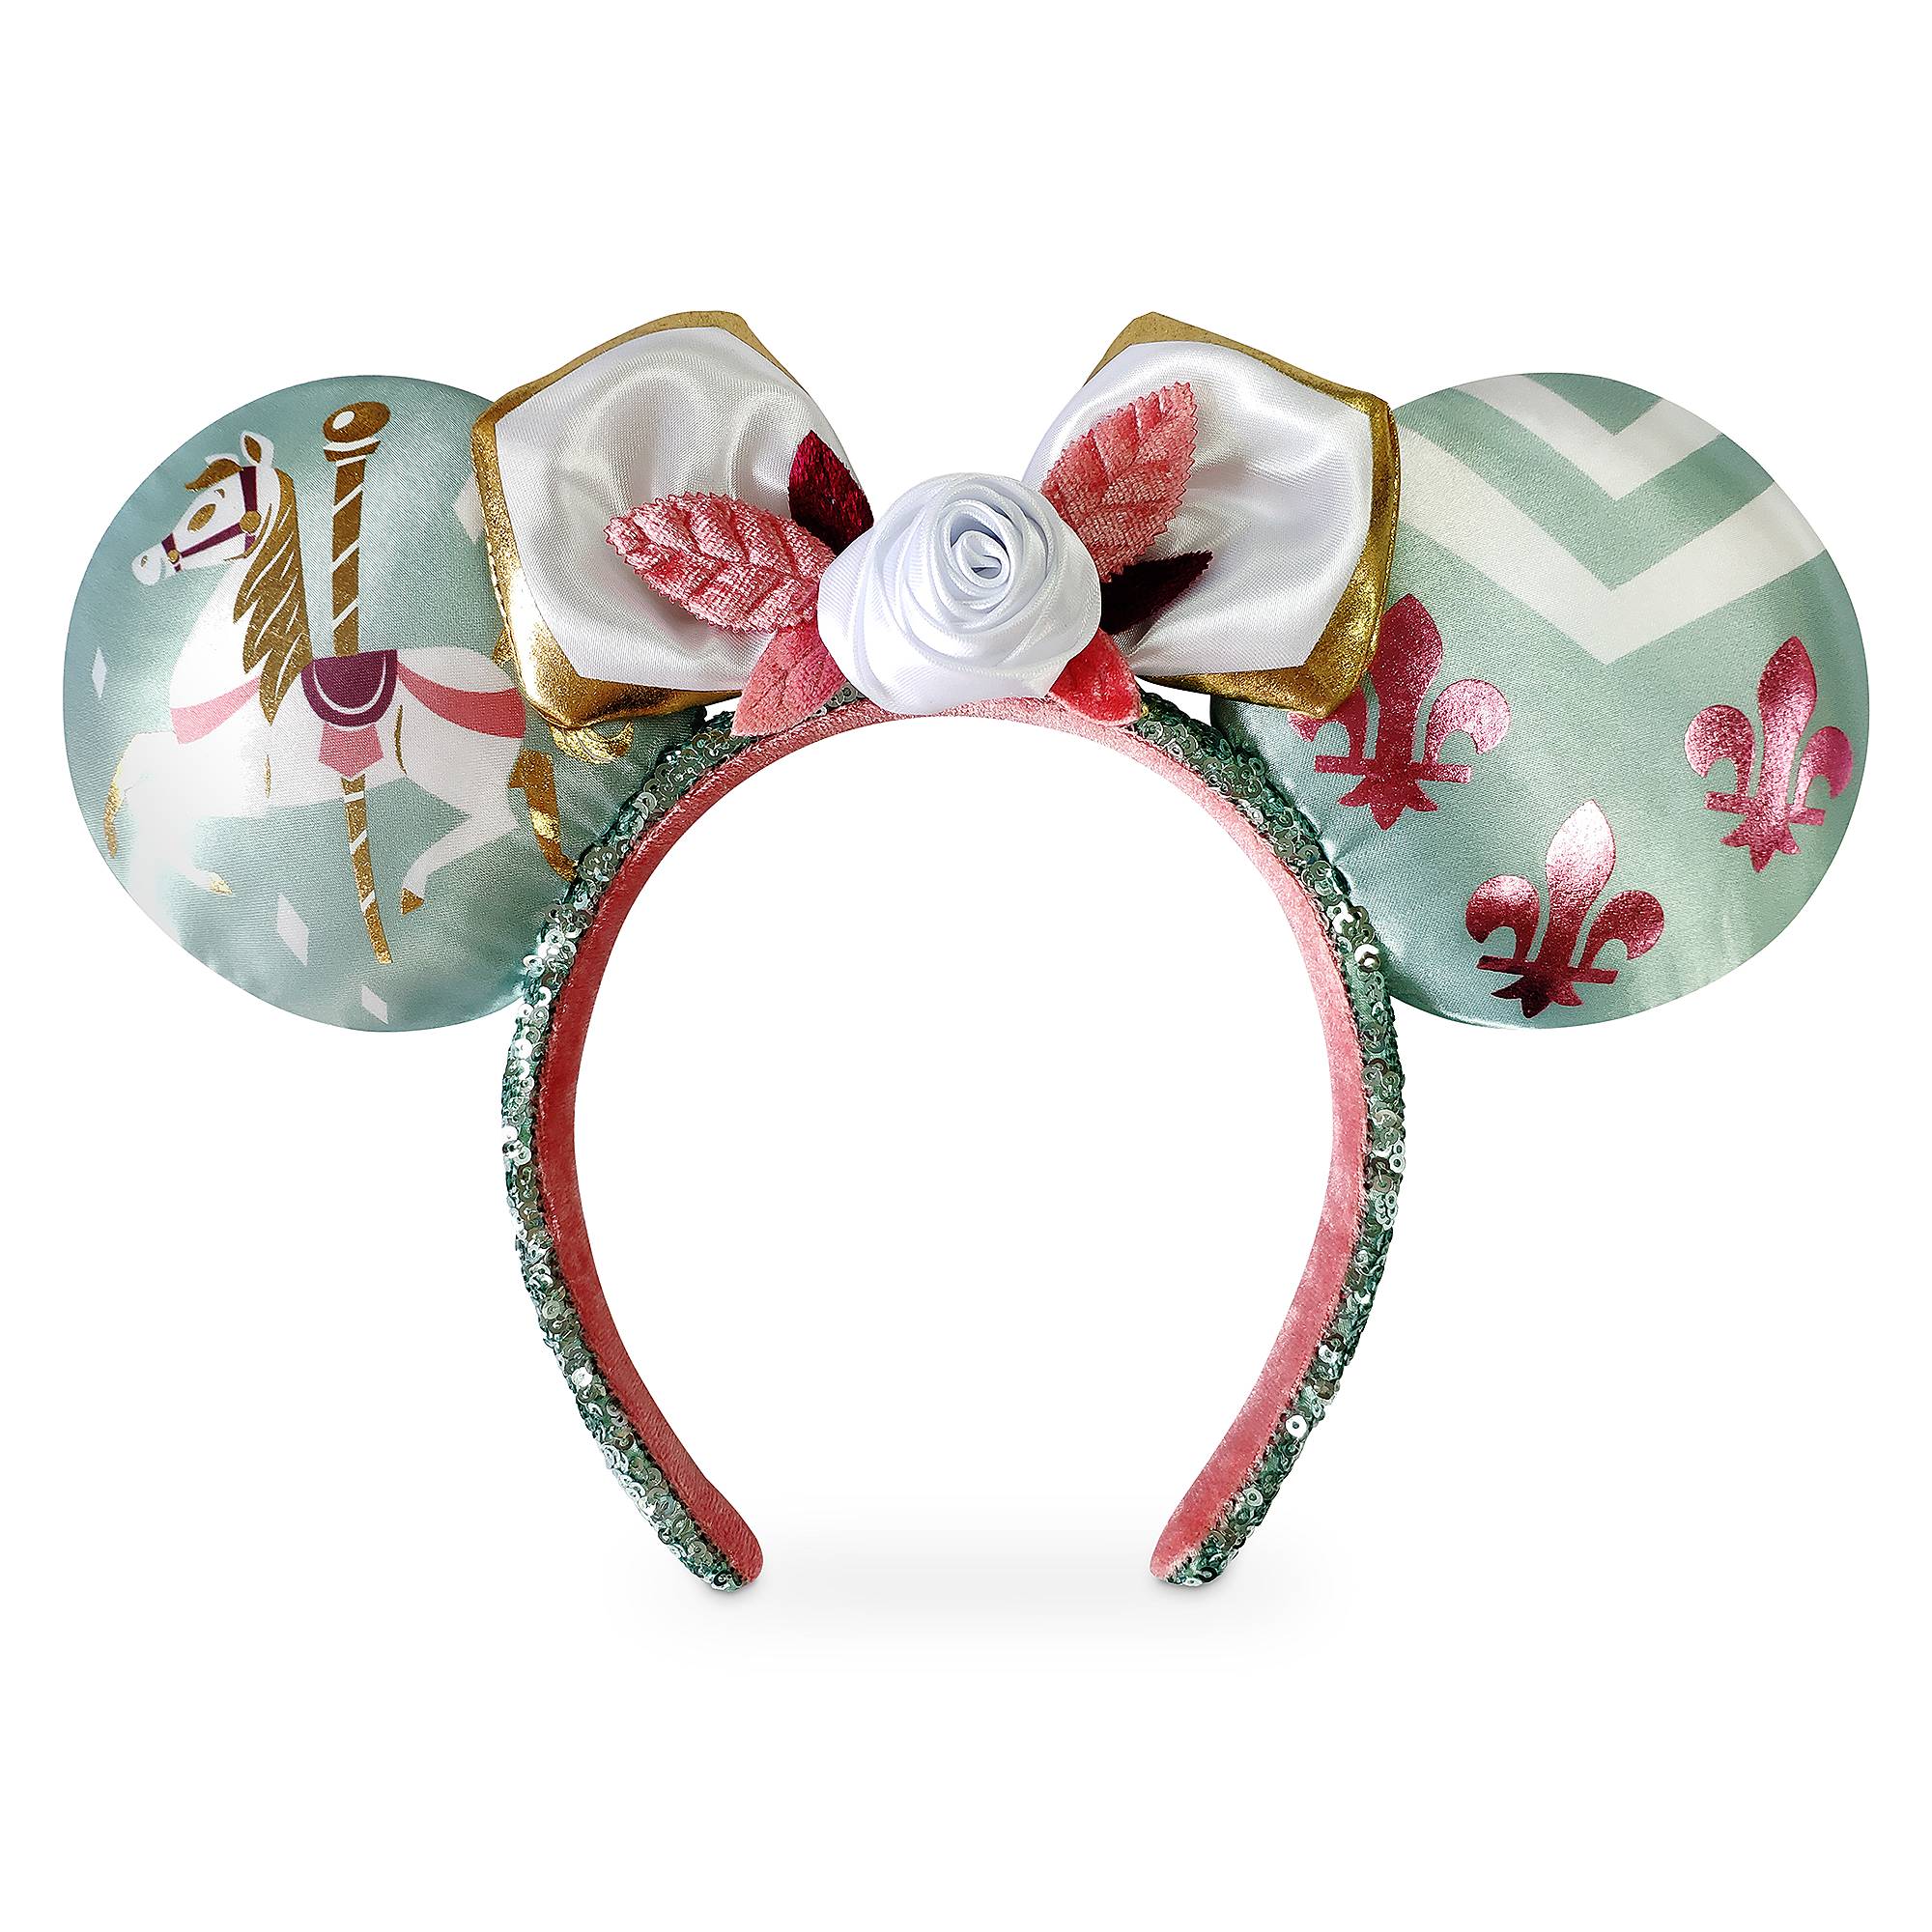 Minnie Mouse - The Main Attraction Ear Headband for Adults – King Arthur Carrousel – Limited Release image